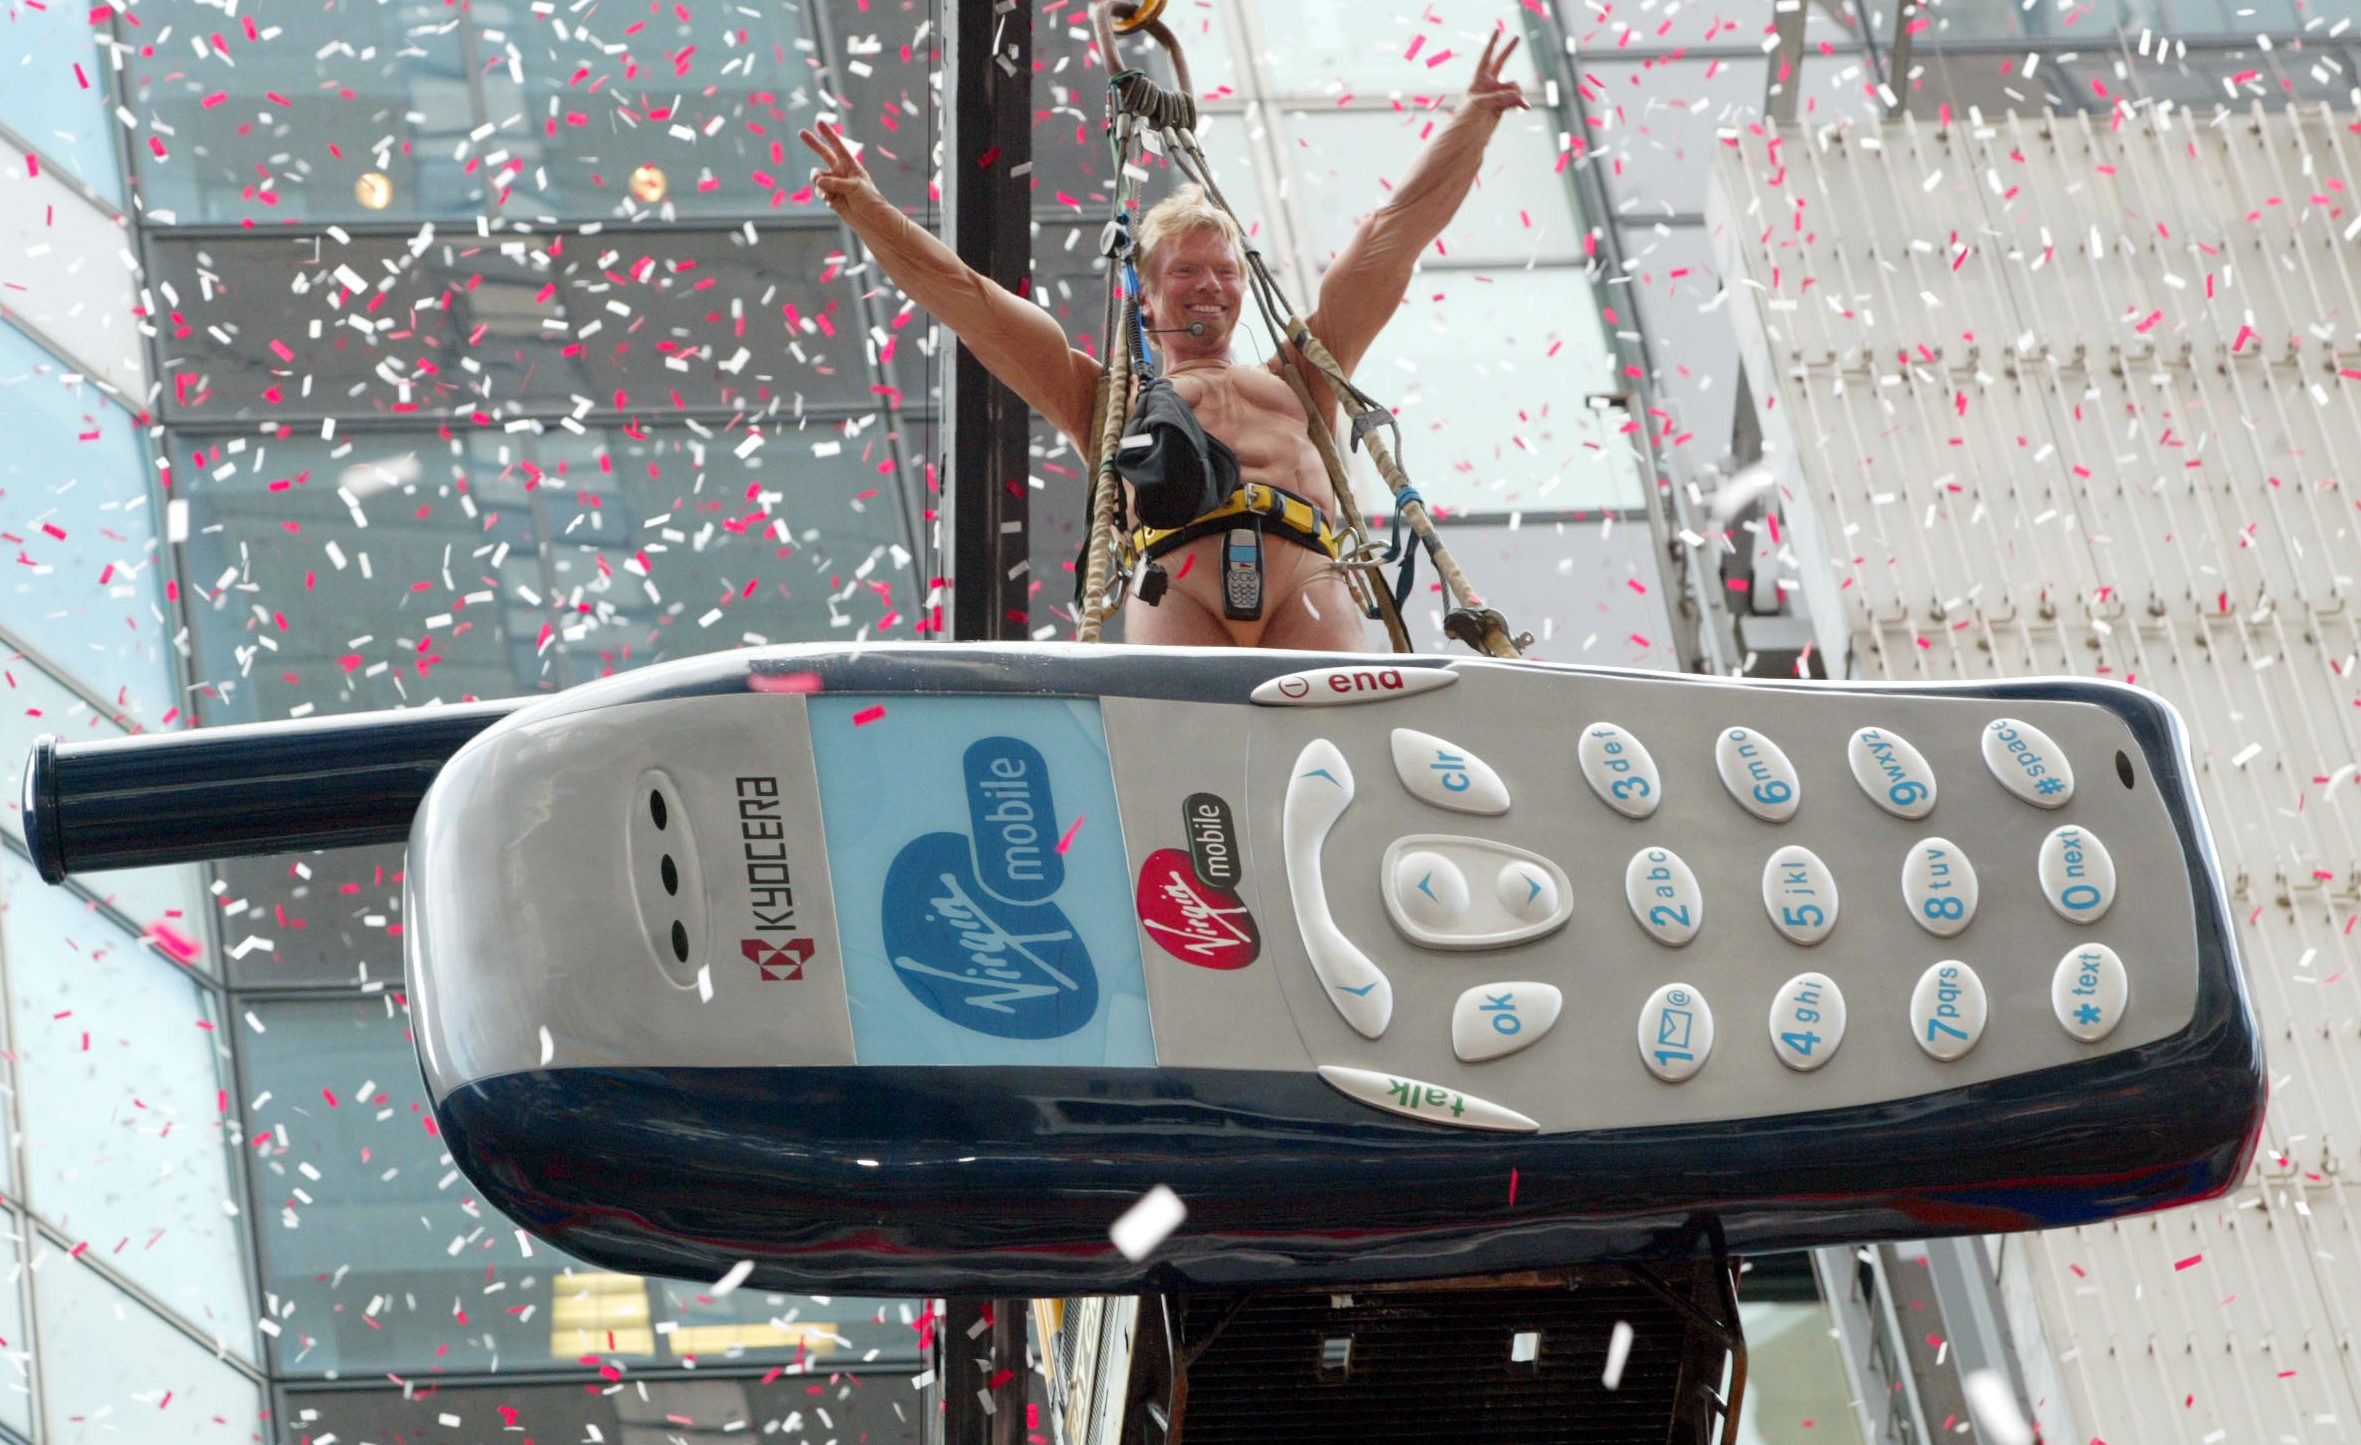 Richard Branson launches Virgin Mobile USA Cellular phone service in NYC. July 24, 2002